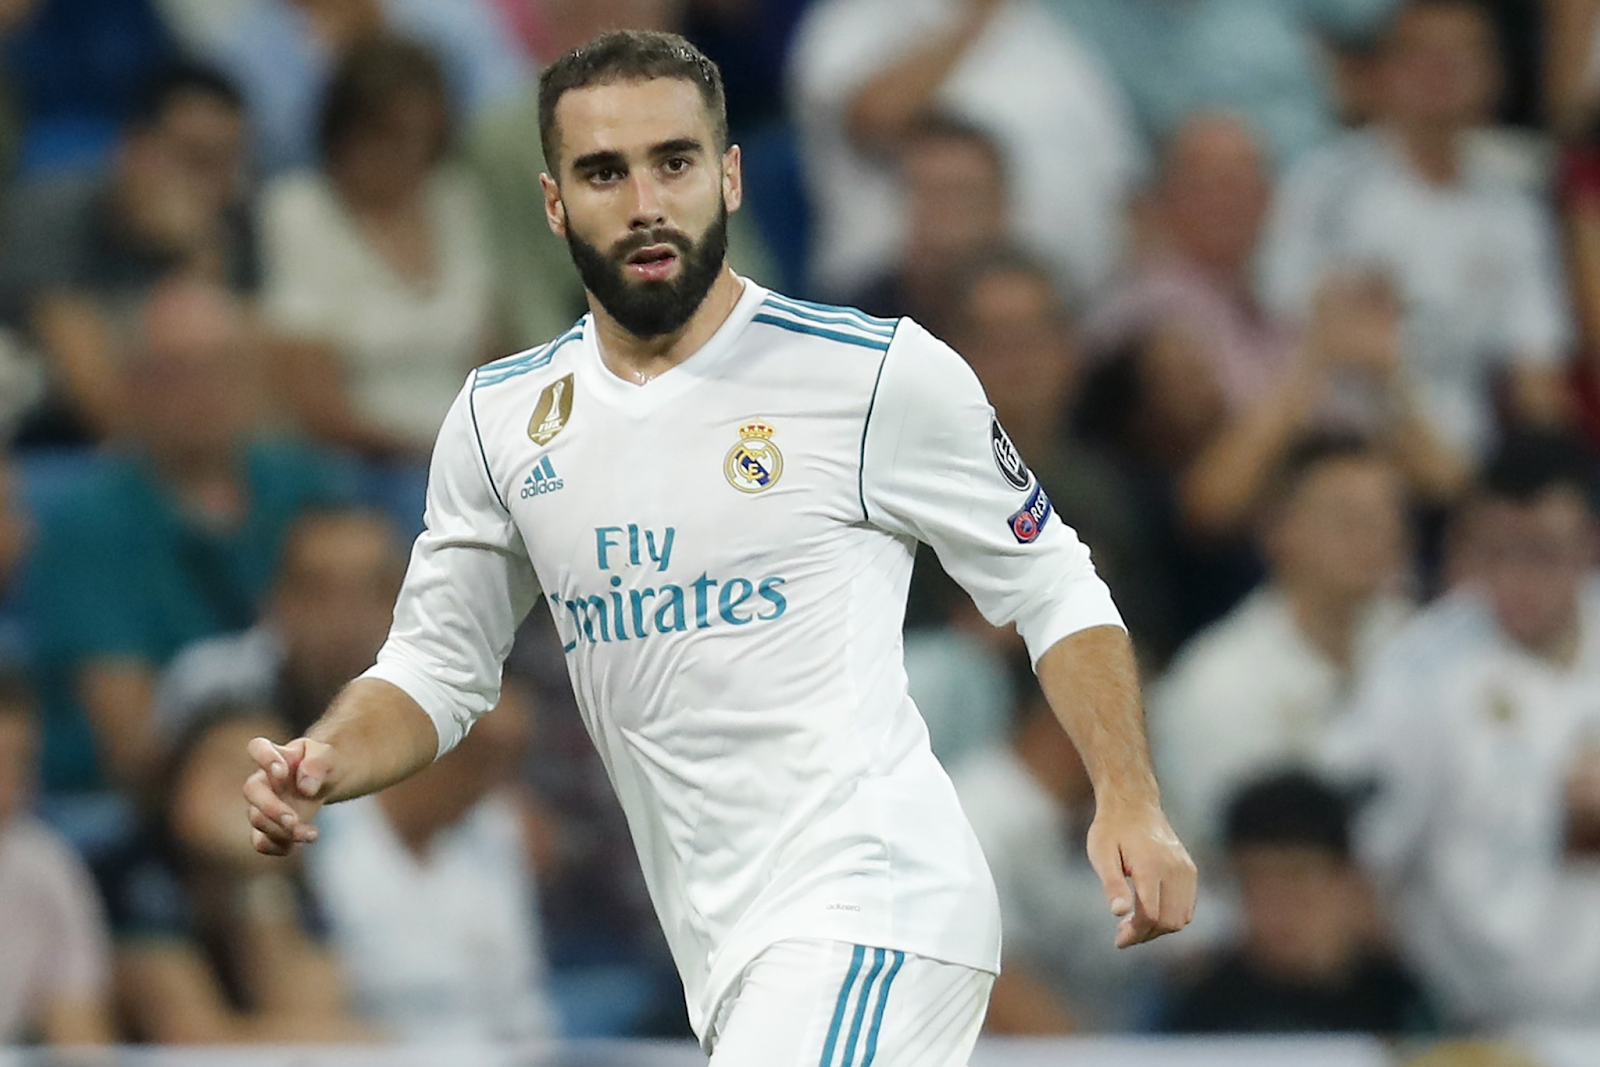 Dani Carvajal is expected to feature in this match